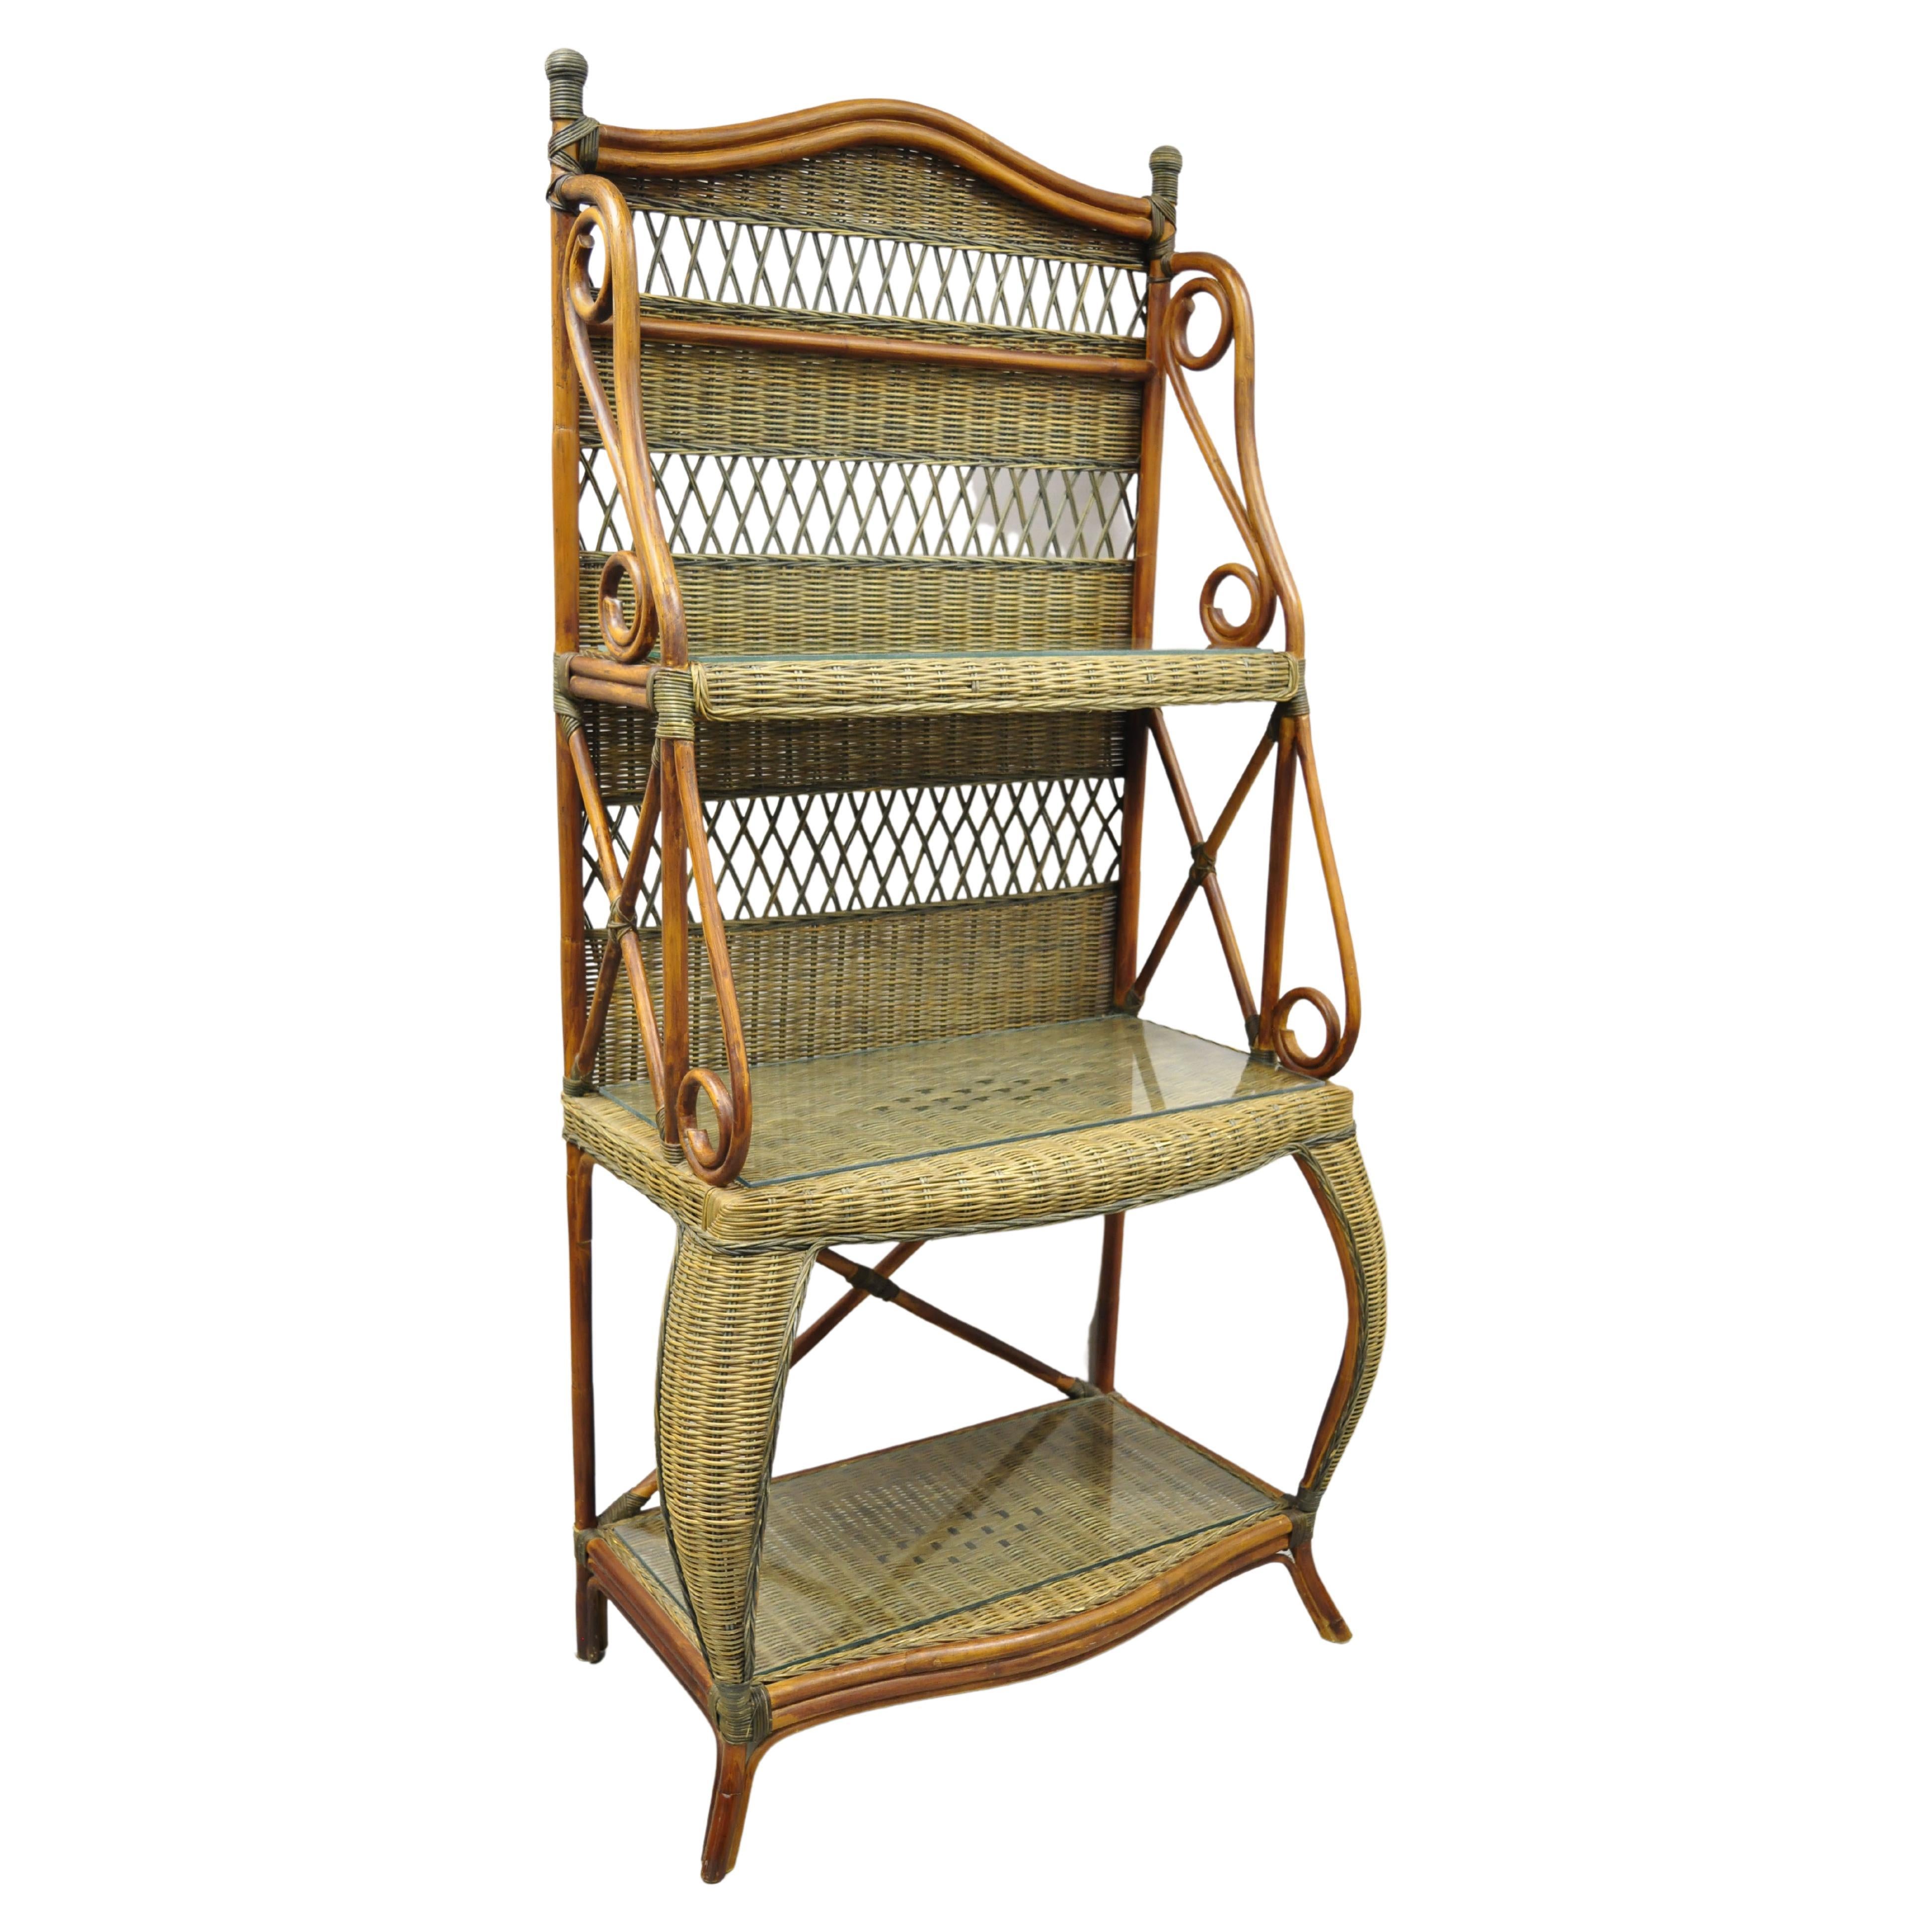 French Country 3 Tier Wicker Rattan Wrapped Frame Kitchen Bakers Rack Stand